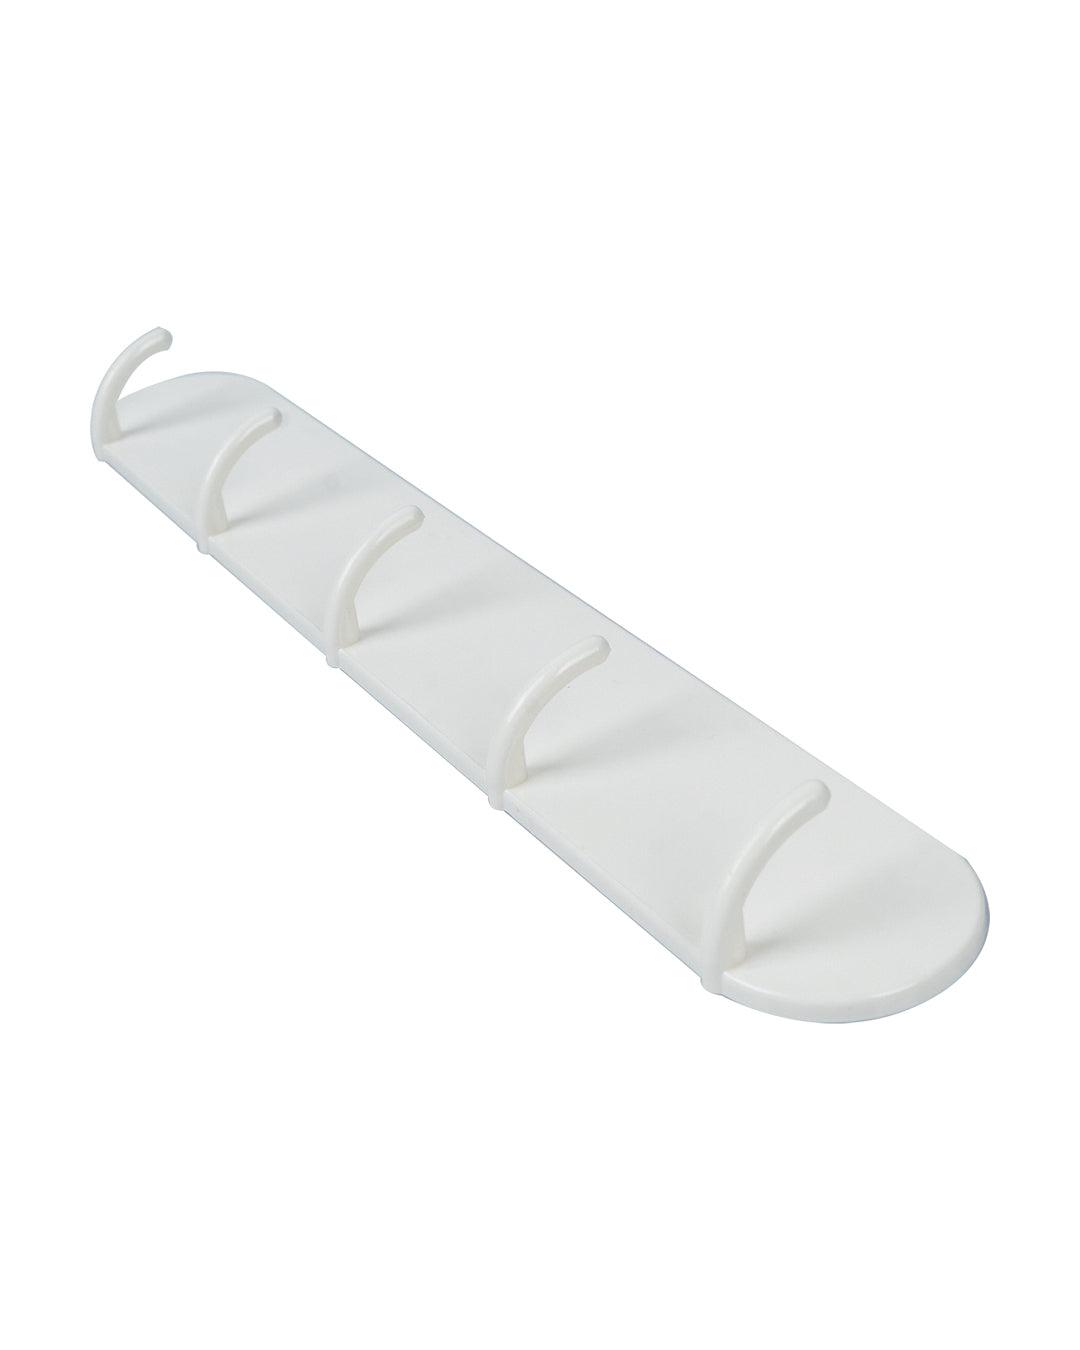 Buy Solid Sticky Hook Bar, Self Adhesive Bar,, White, Plastic at